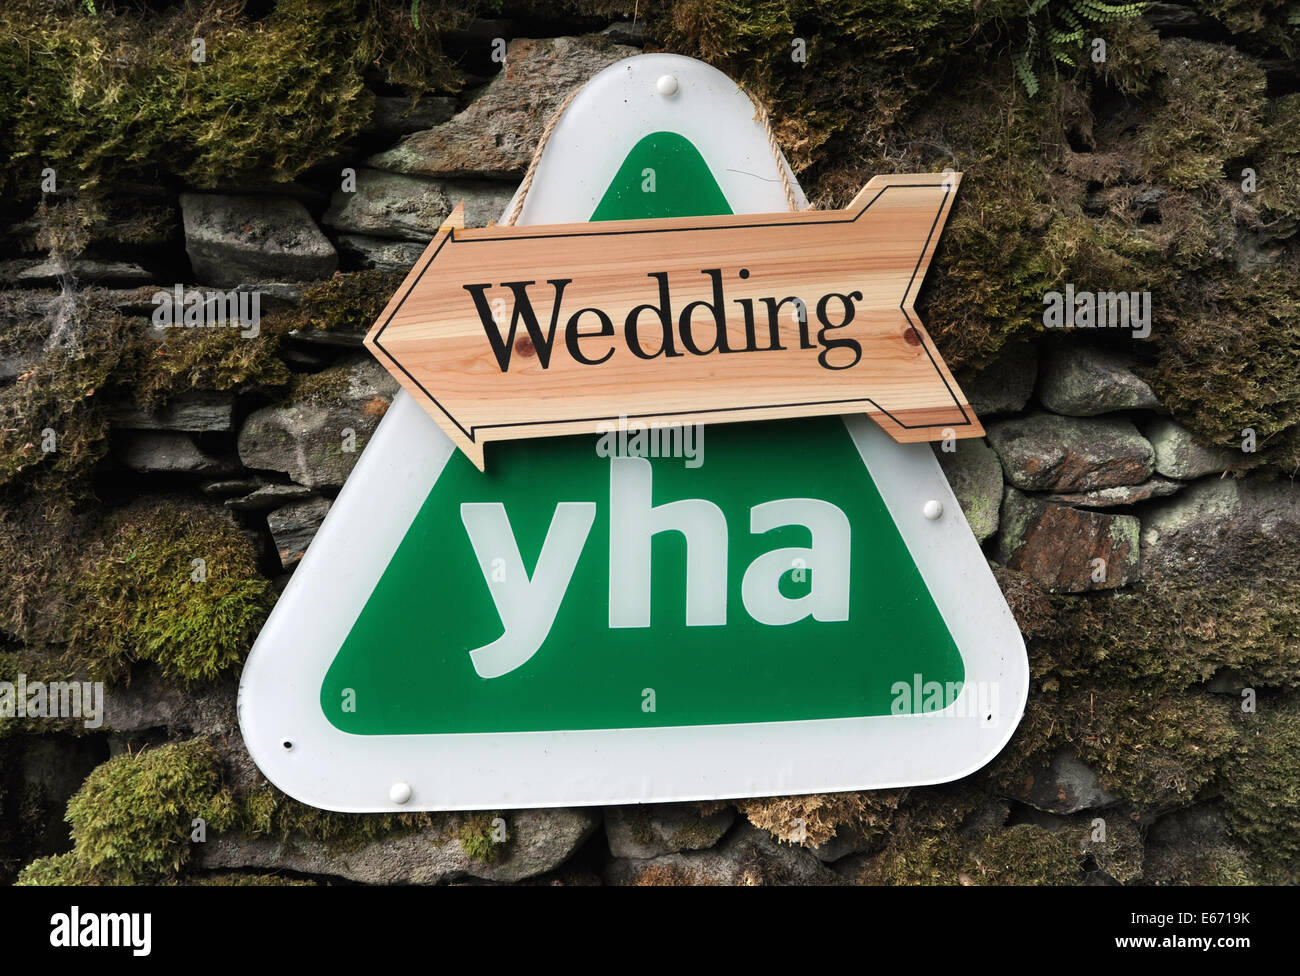 YOUTH HOSTEL ASSOCIATION SIGN WITH WEDDING DIRECTION SIGN RE YHA  UNUSUAL WEDDING VENUES LOCATIONS PLACES MARRIED MARRIAGE UK Stock Photo